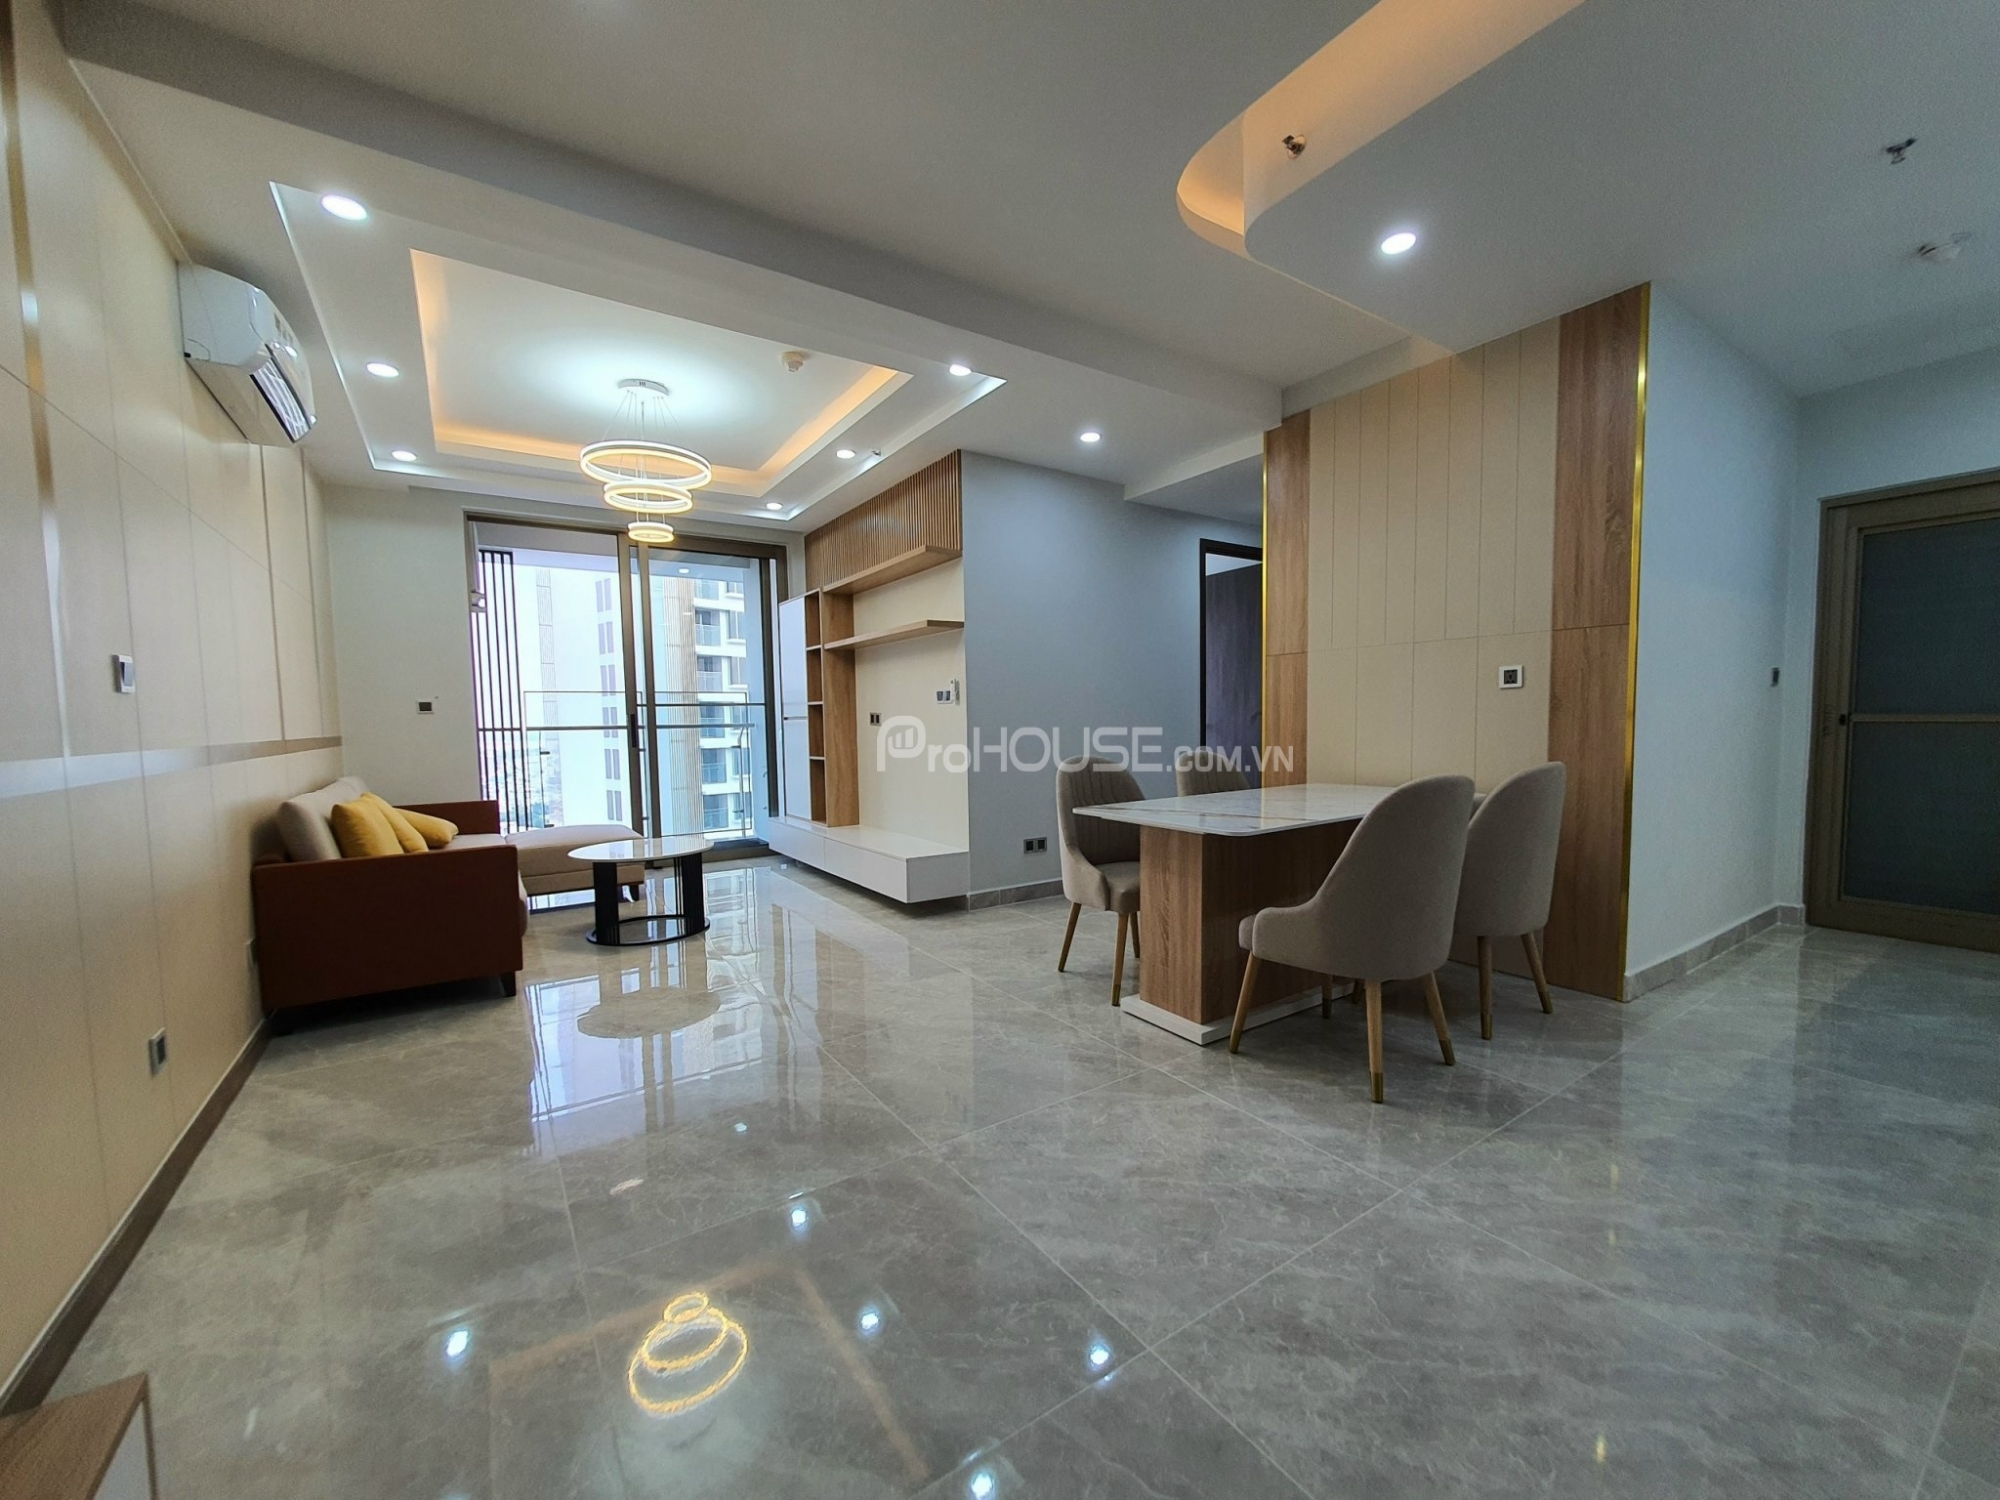 Stunning apartment for rent in Midtown Phu My Hung with fully furnished 2 bedrooms